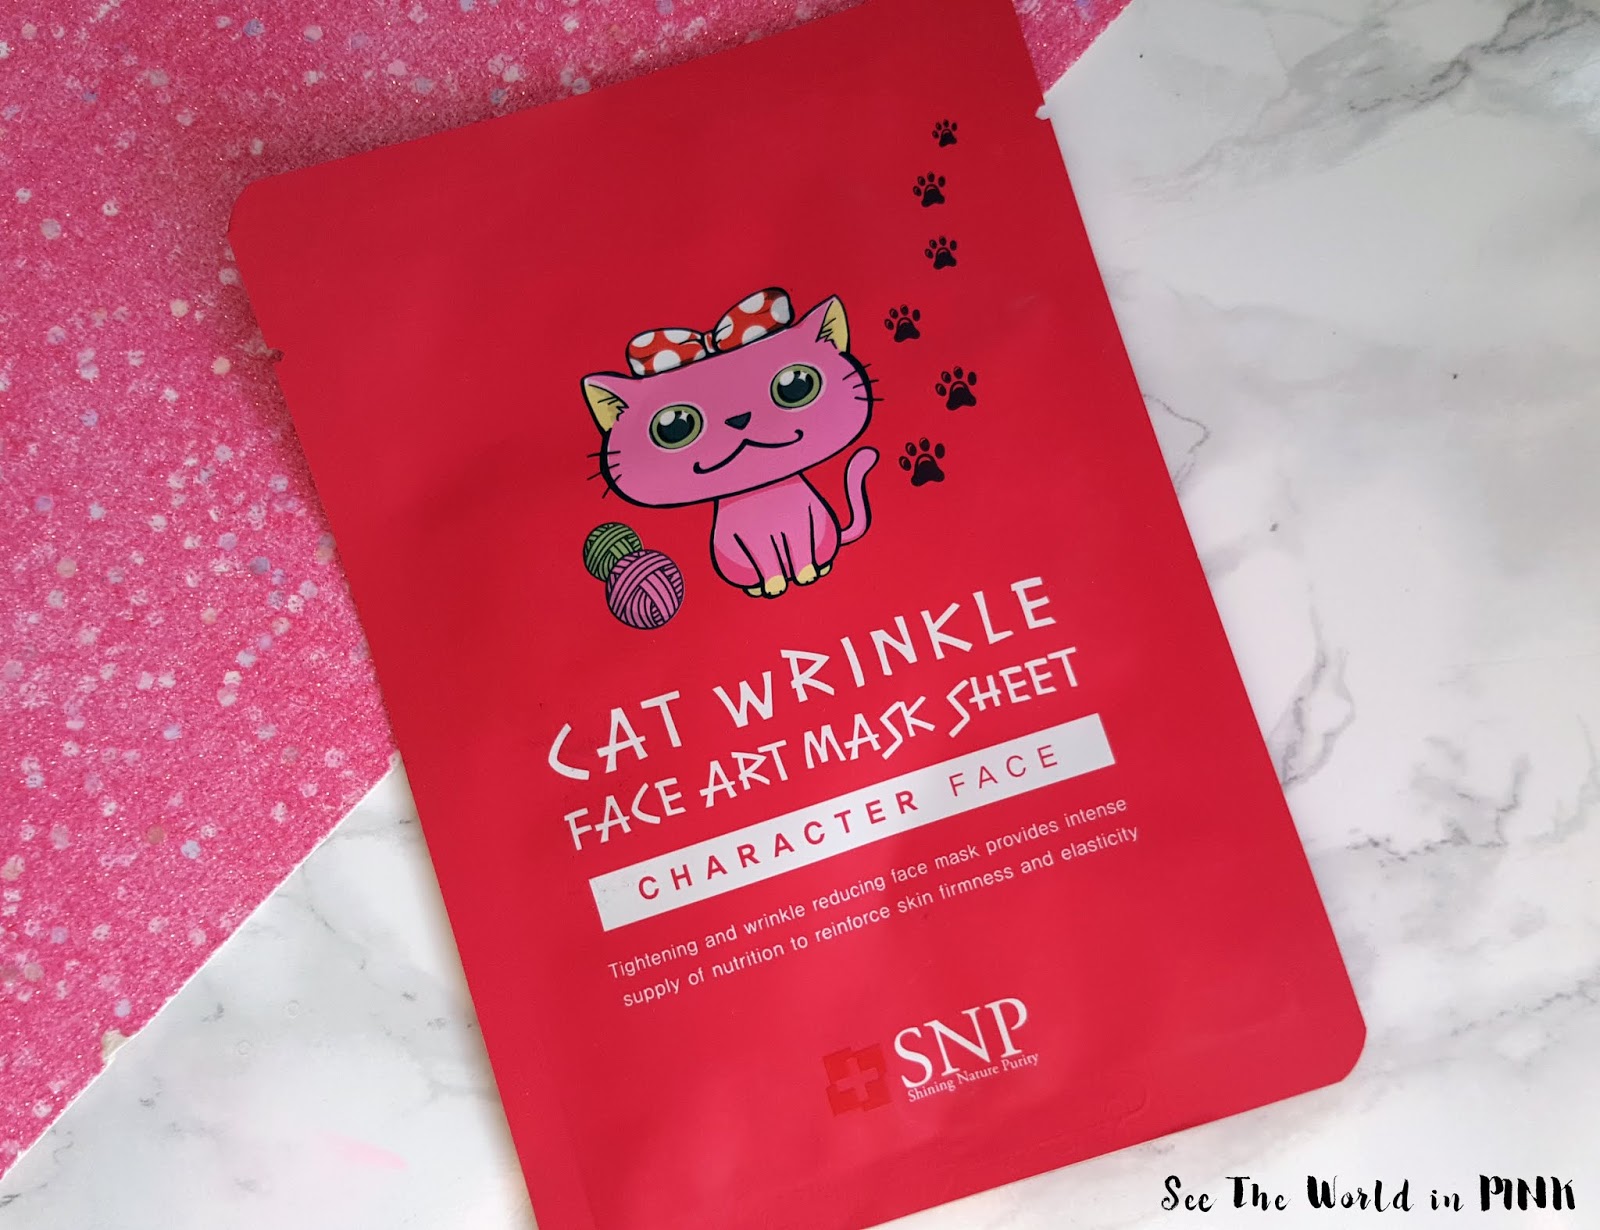 Mask Wednesday - SNP Cat Wrinkle Face Art Mask Sheet Try-on and Review! 